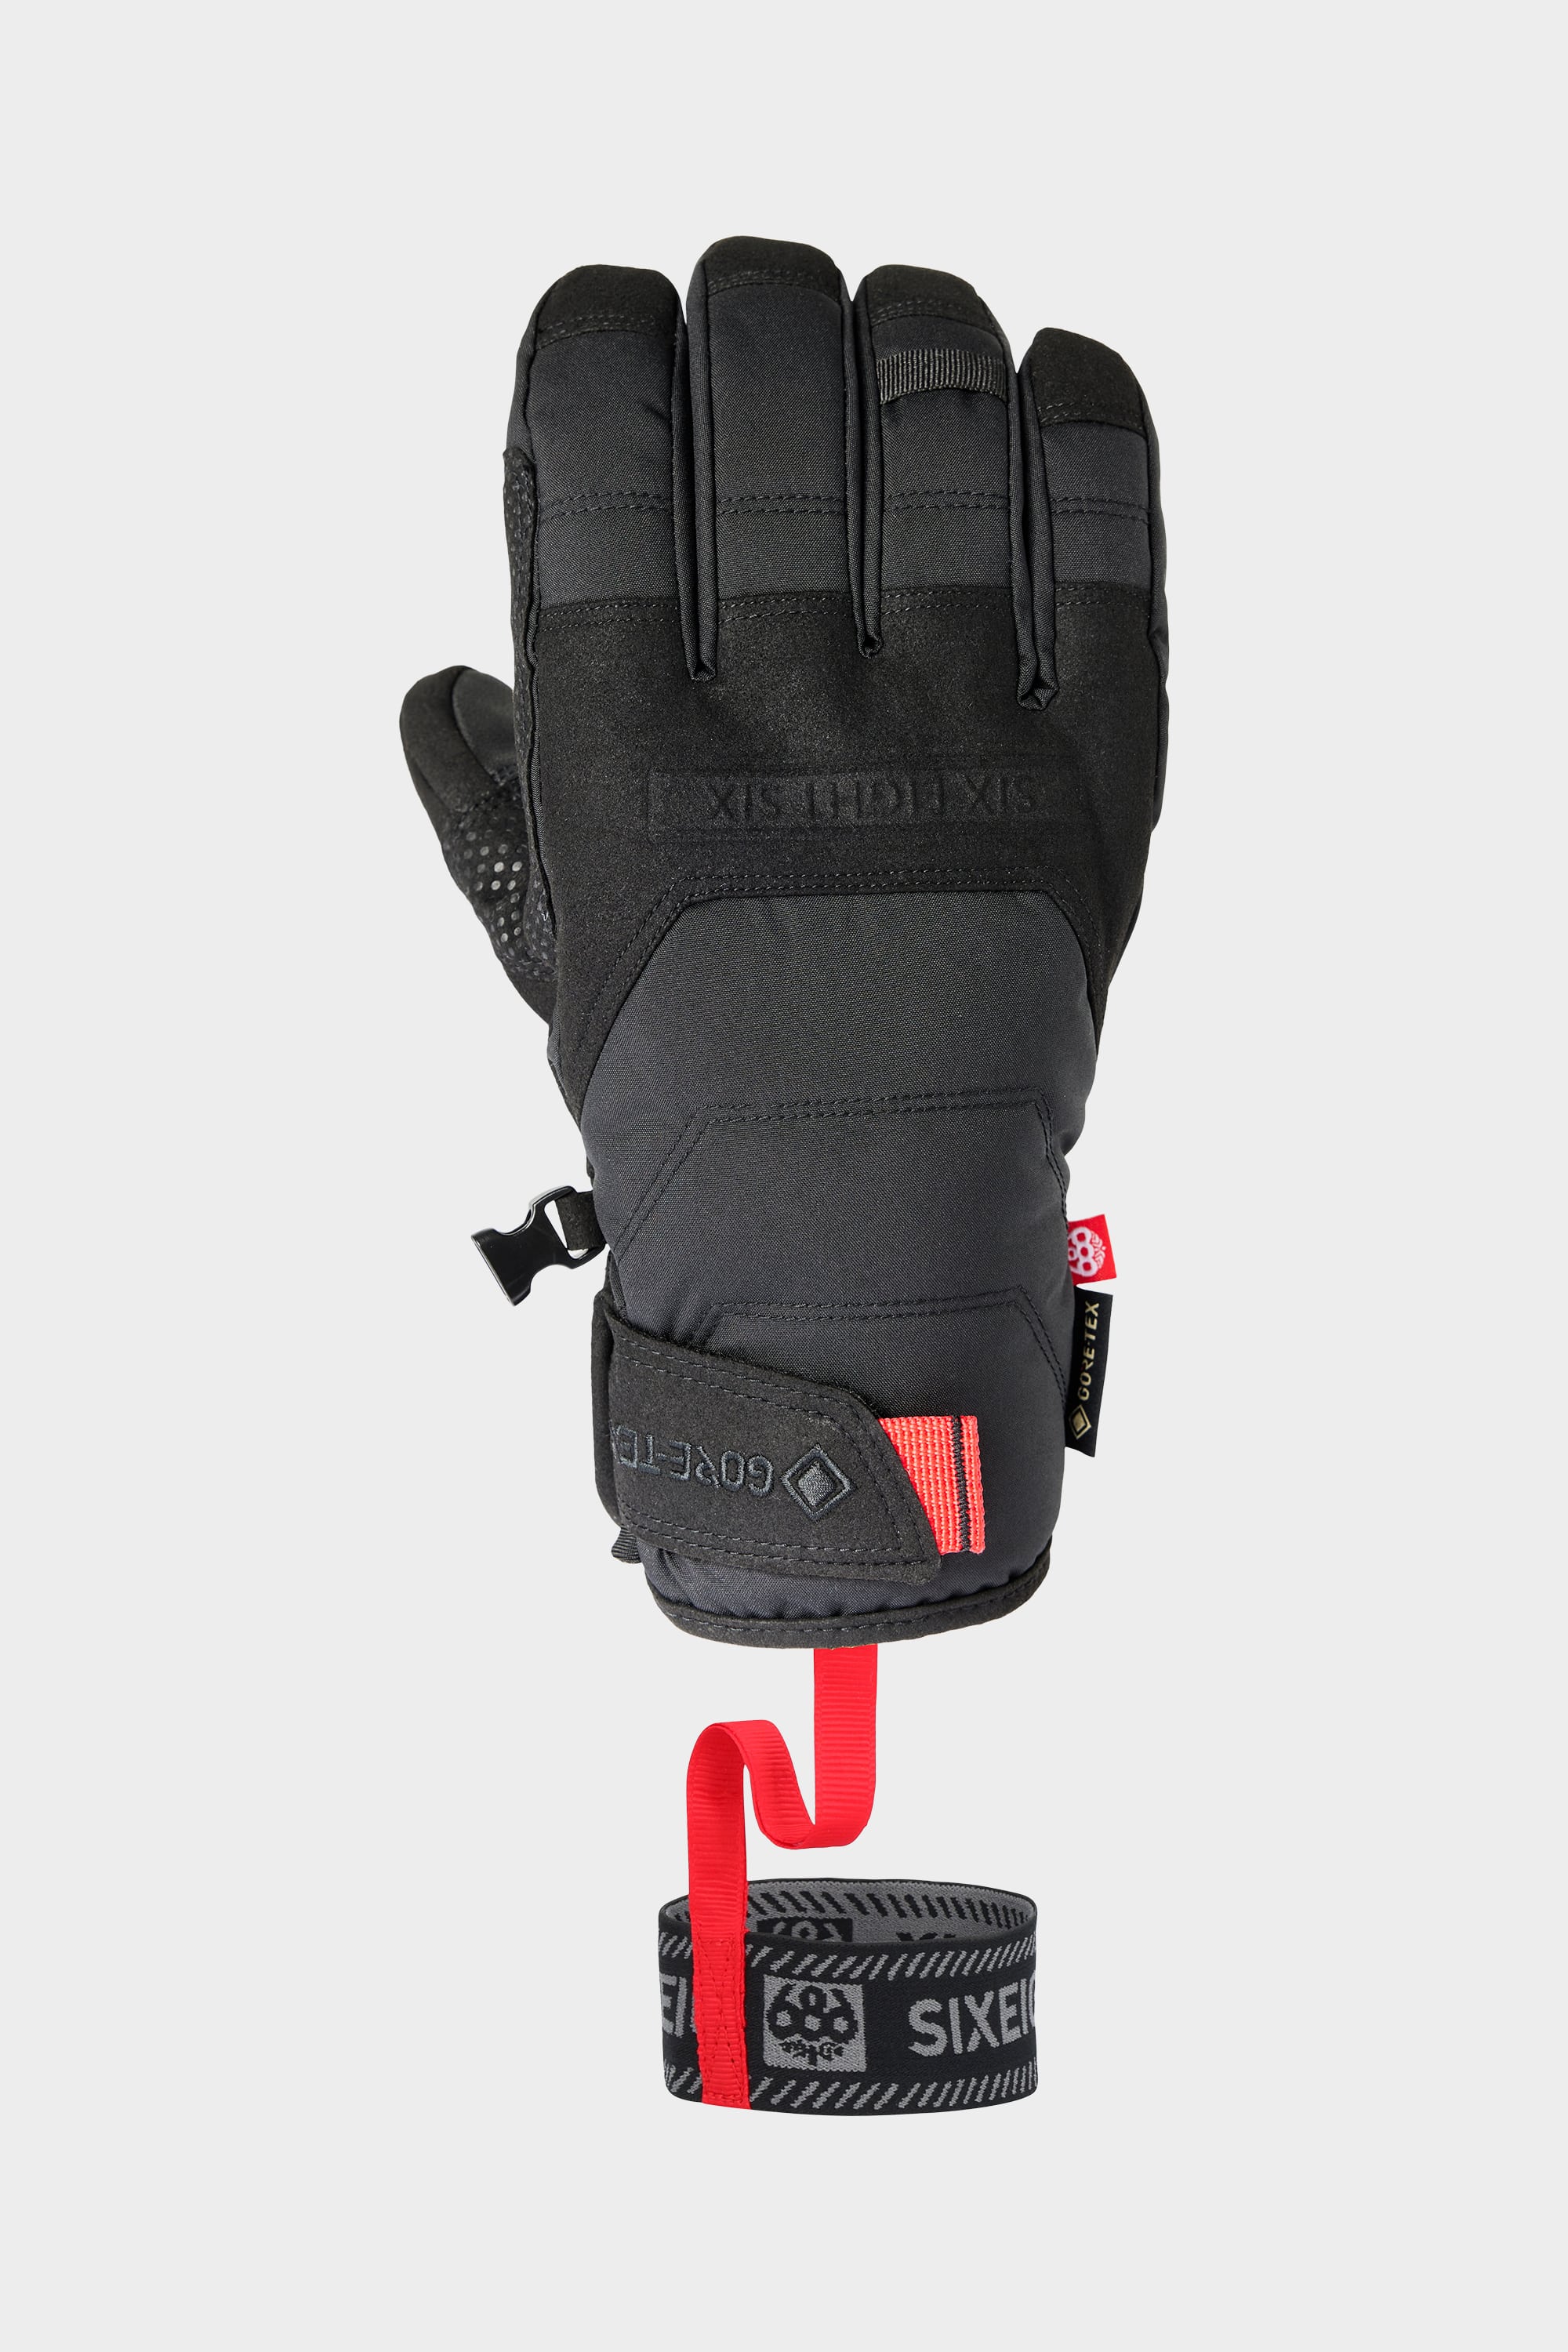 Receive a free pair of Apex Gloves, with rebate, when you purchase